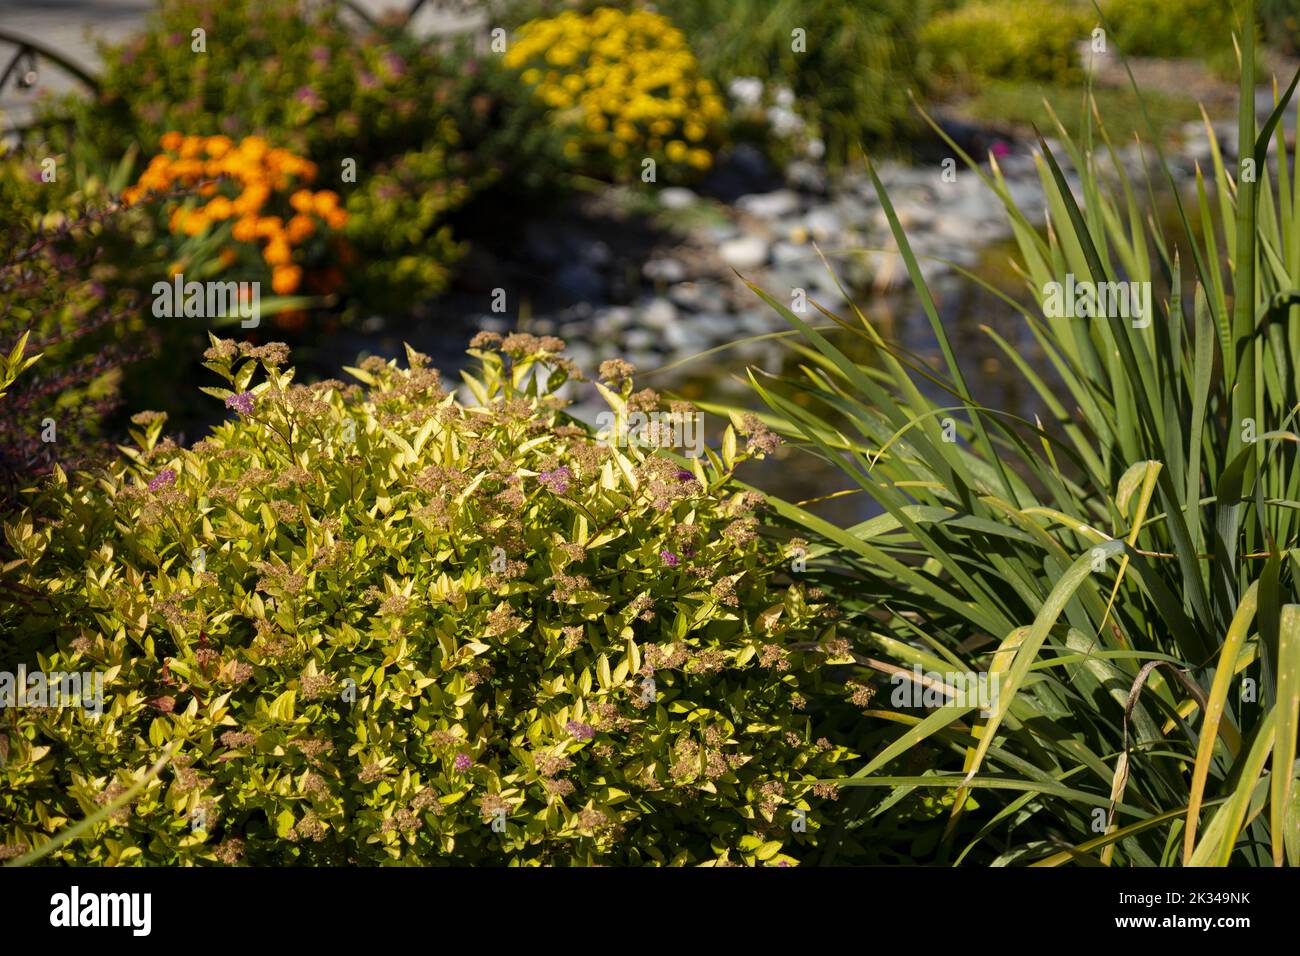 Landscape design in the form of various types of decorative plants. Stock Photo